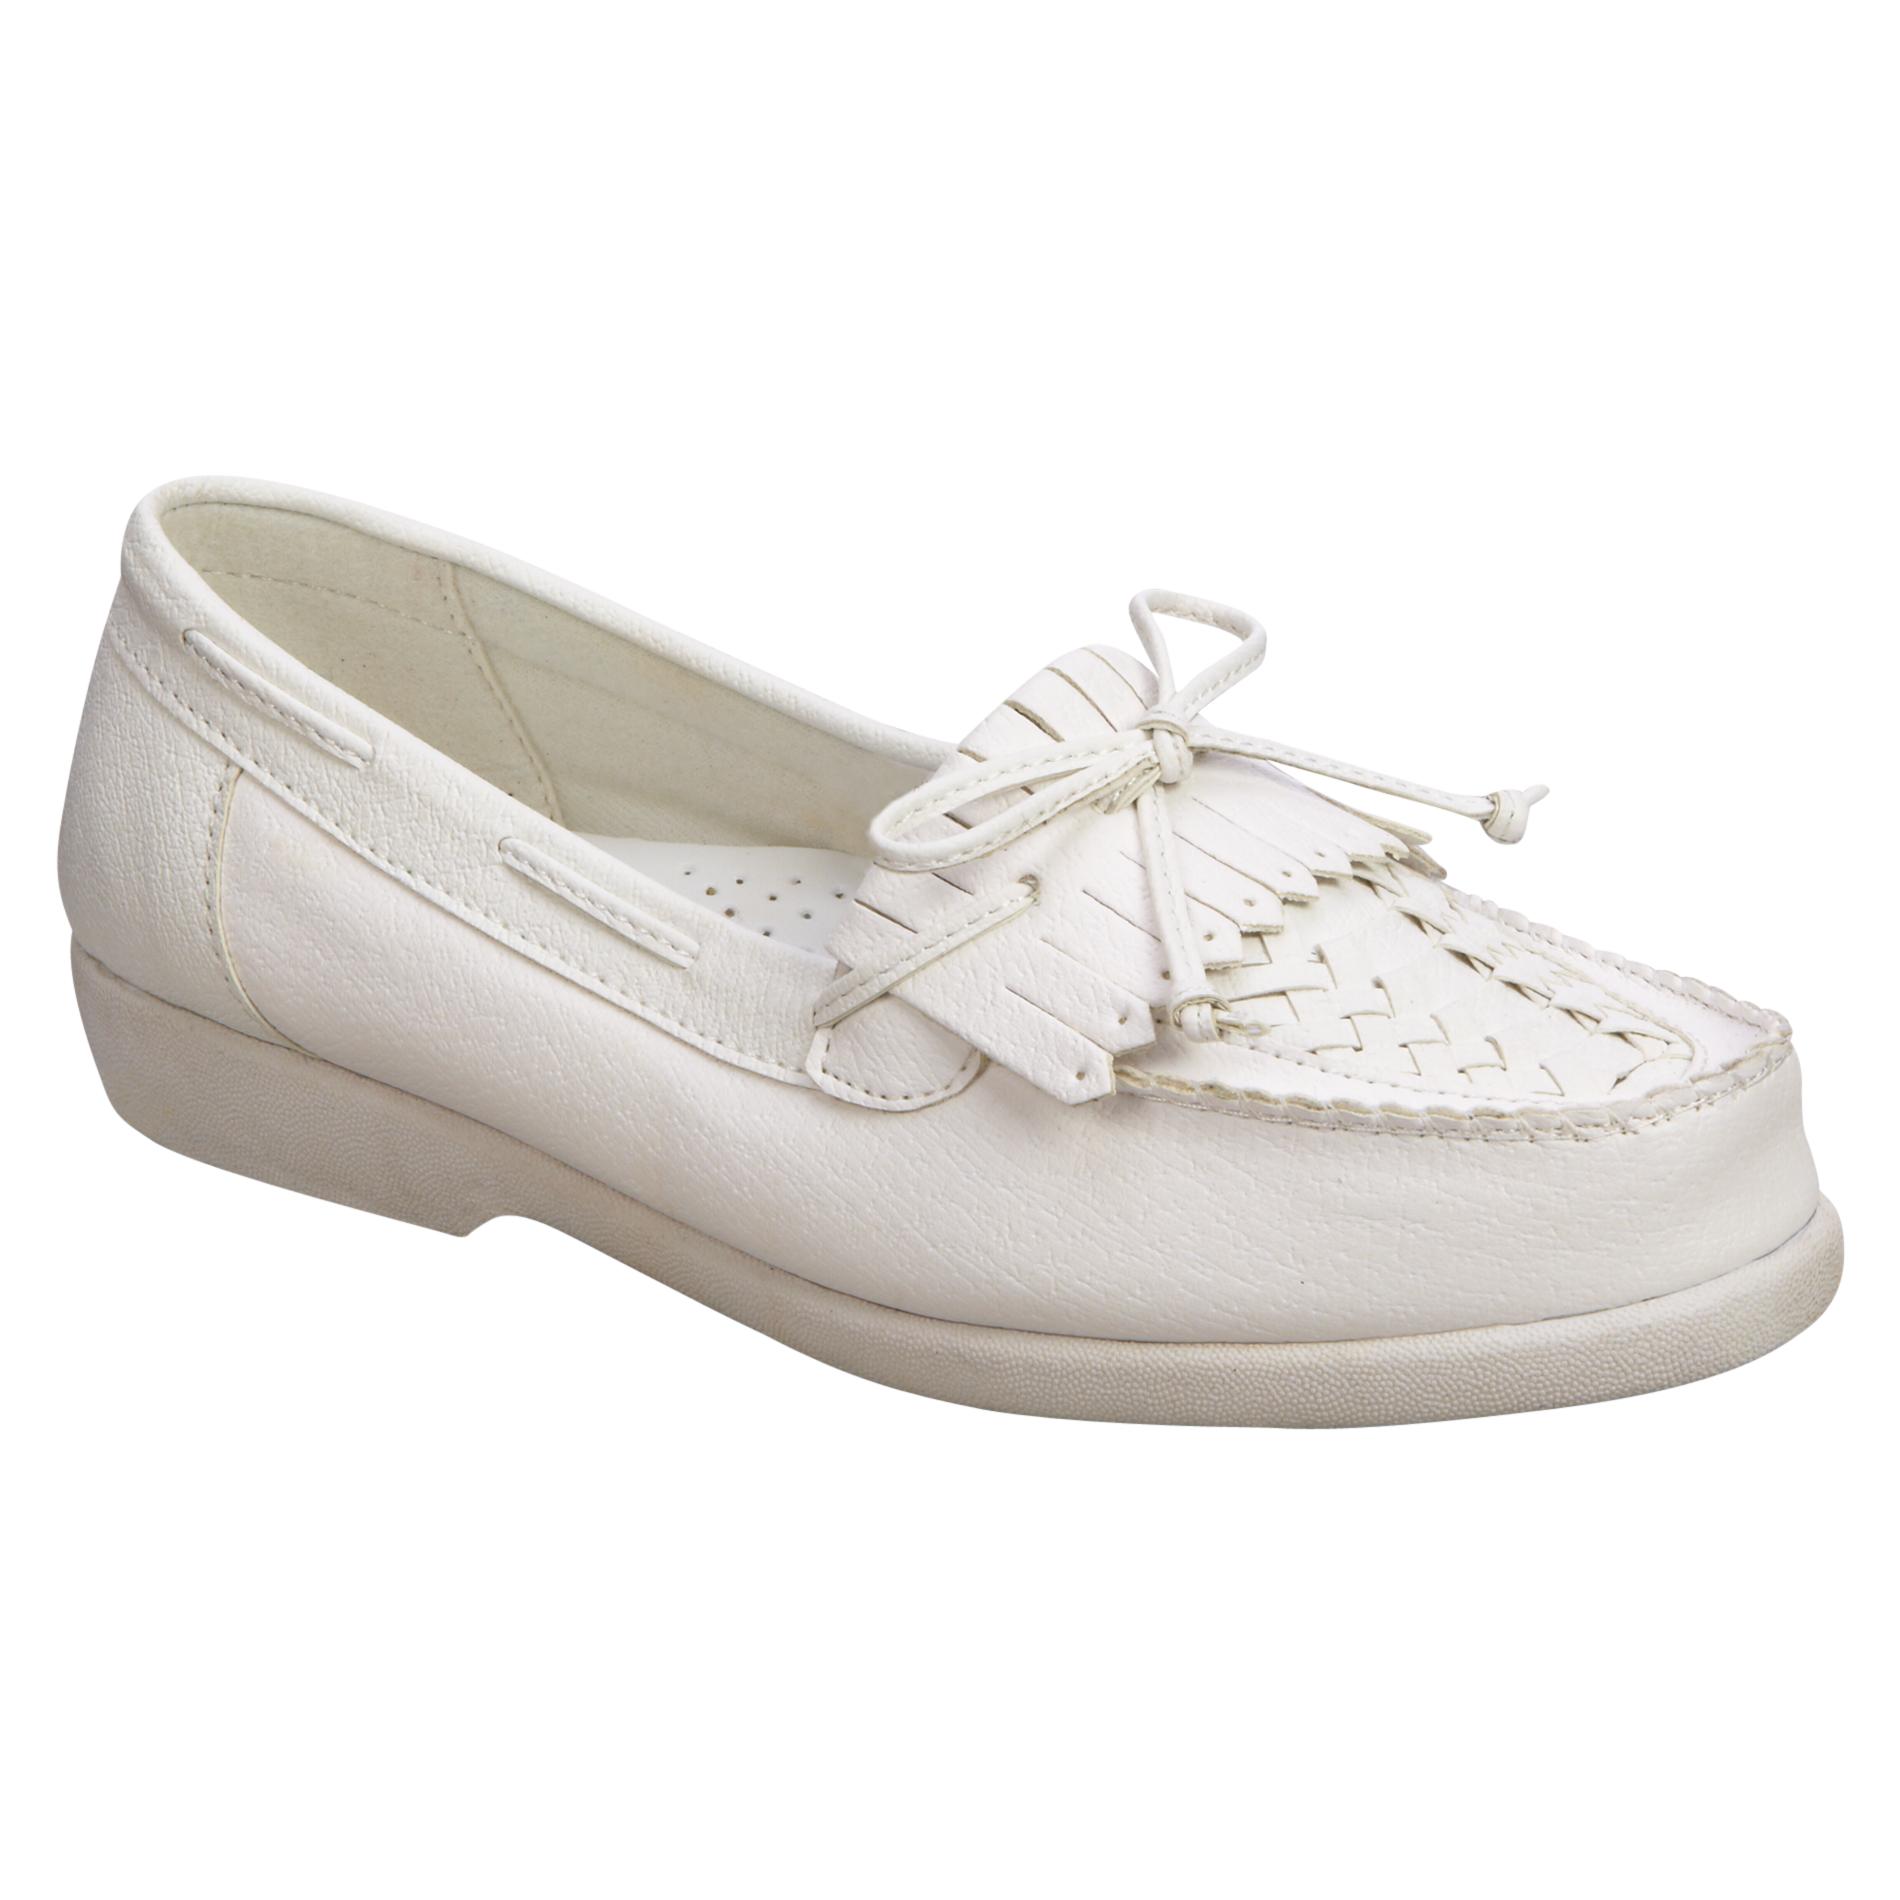 Eloise Leather Wide Width Moccasin - White